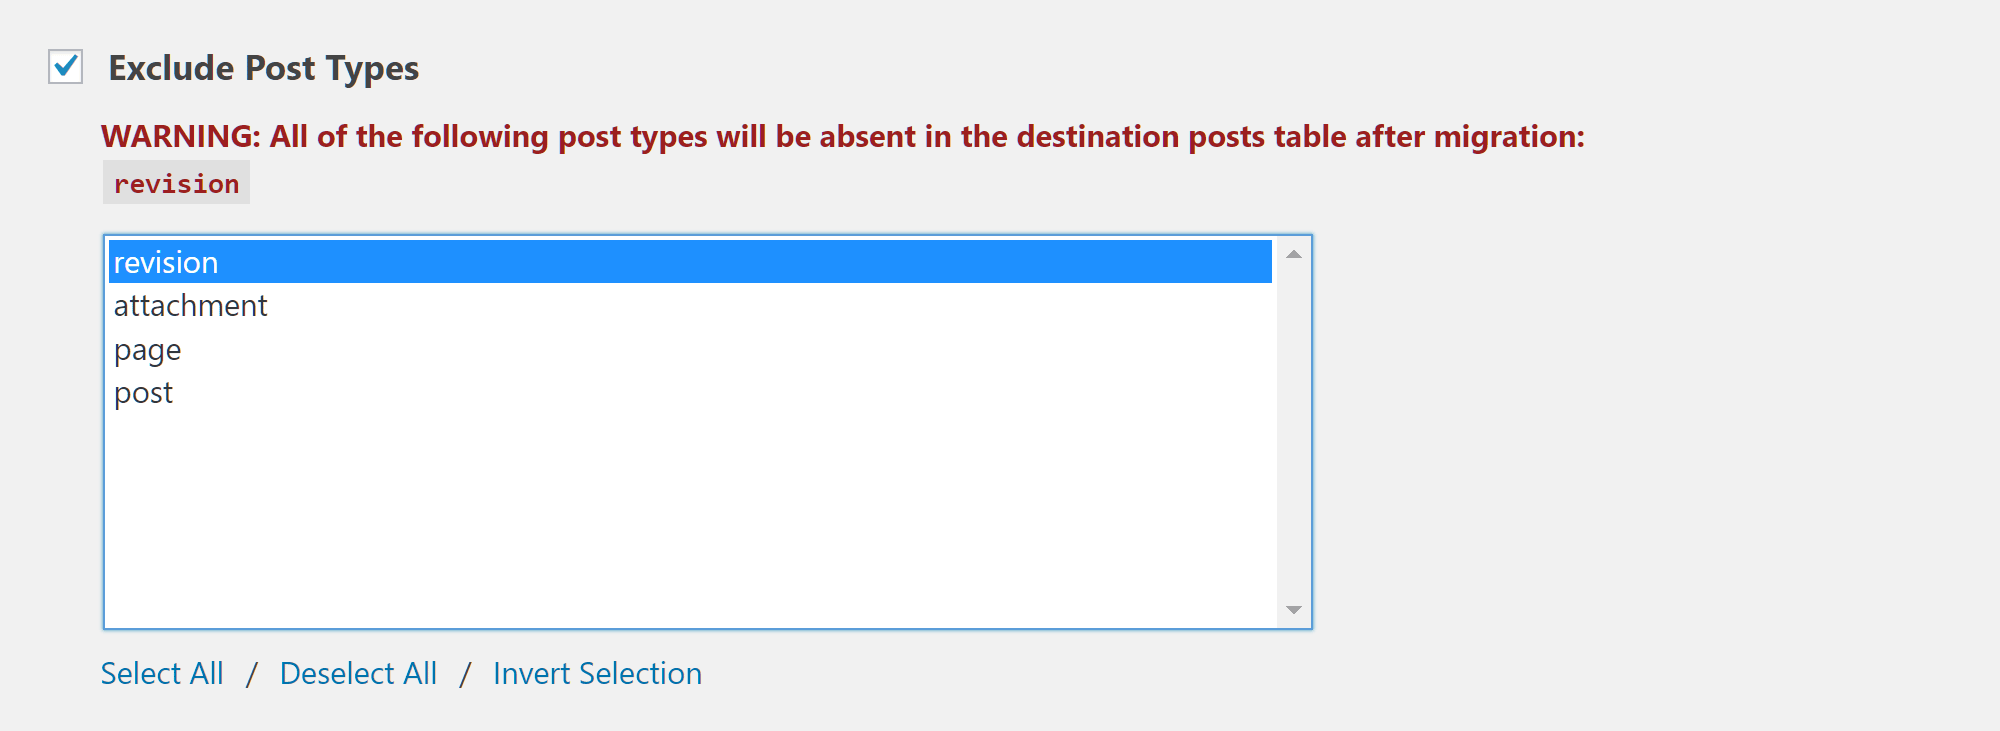 Exclude Post Types